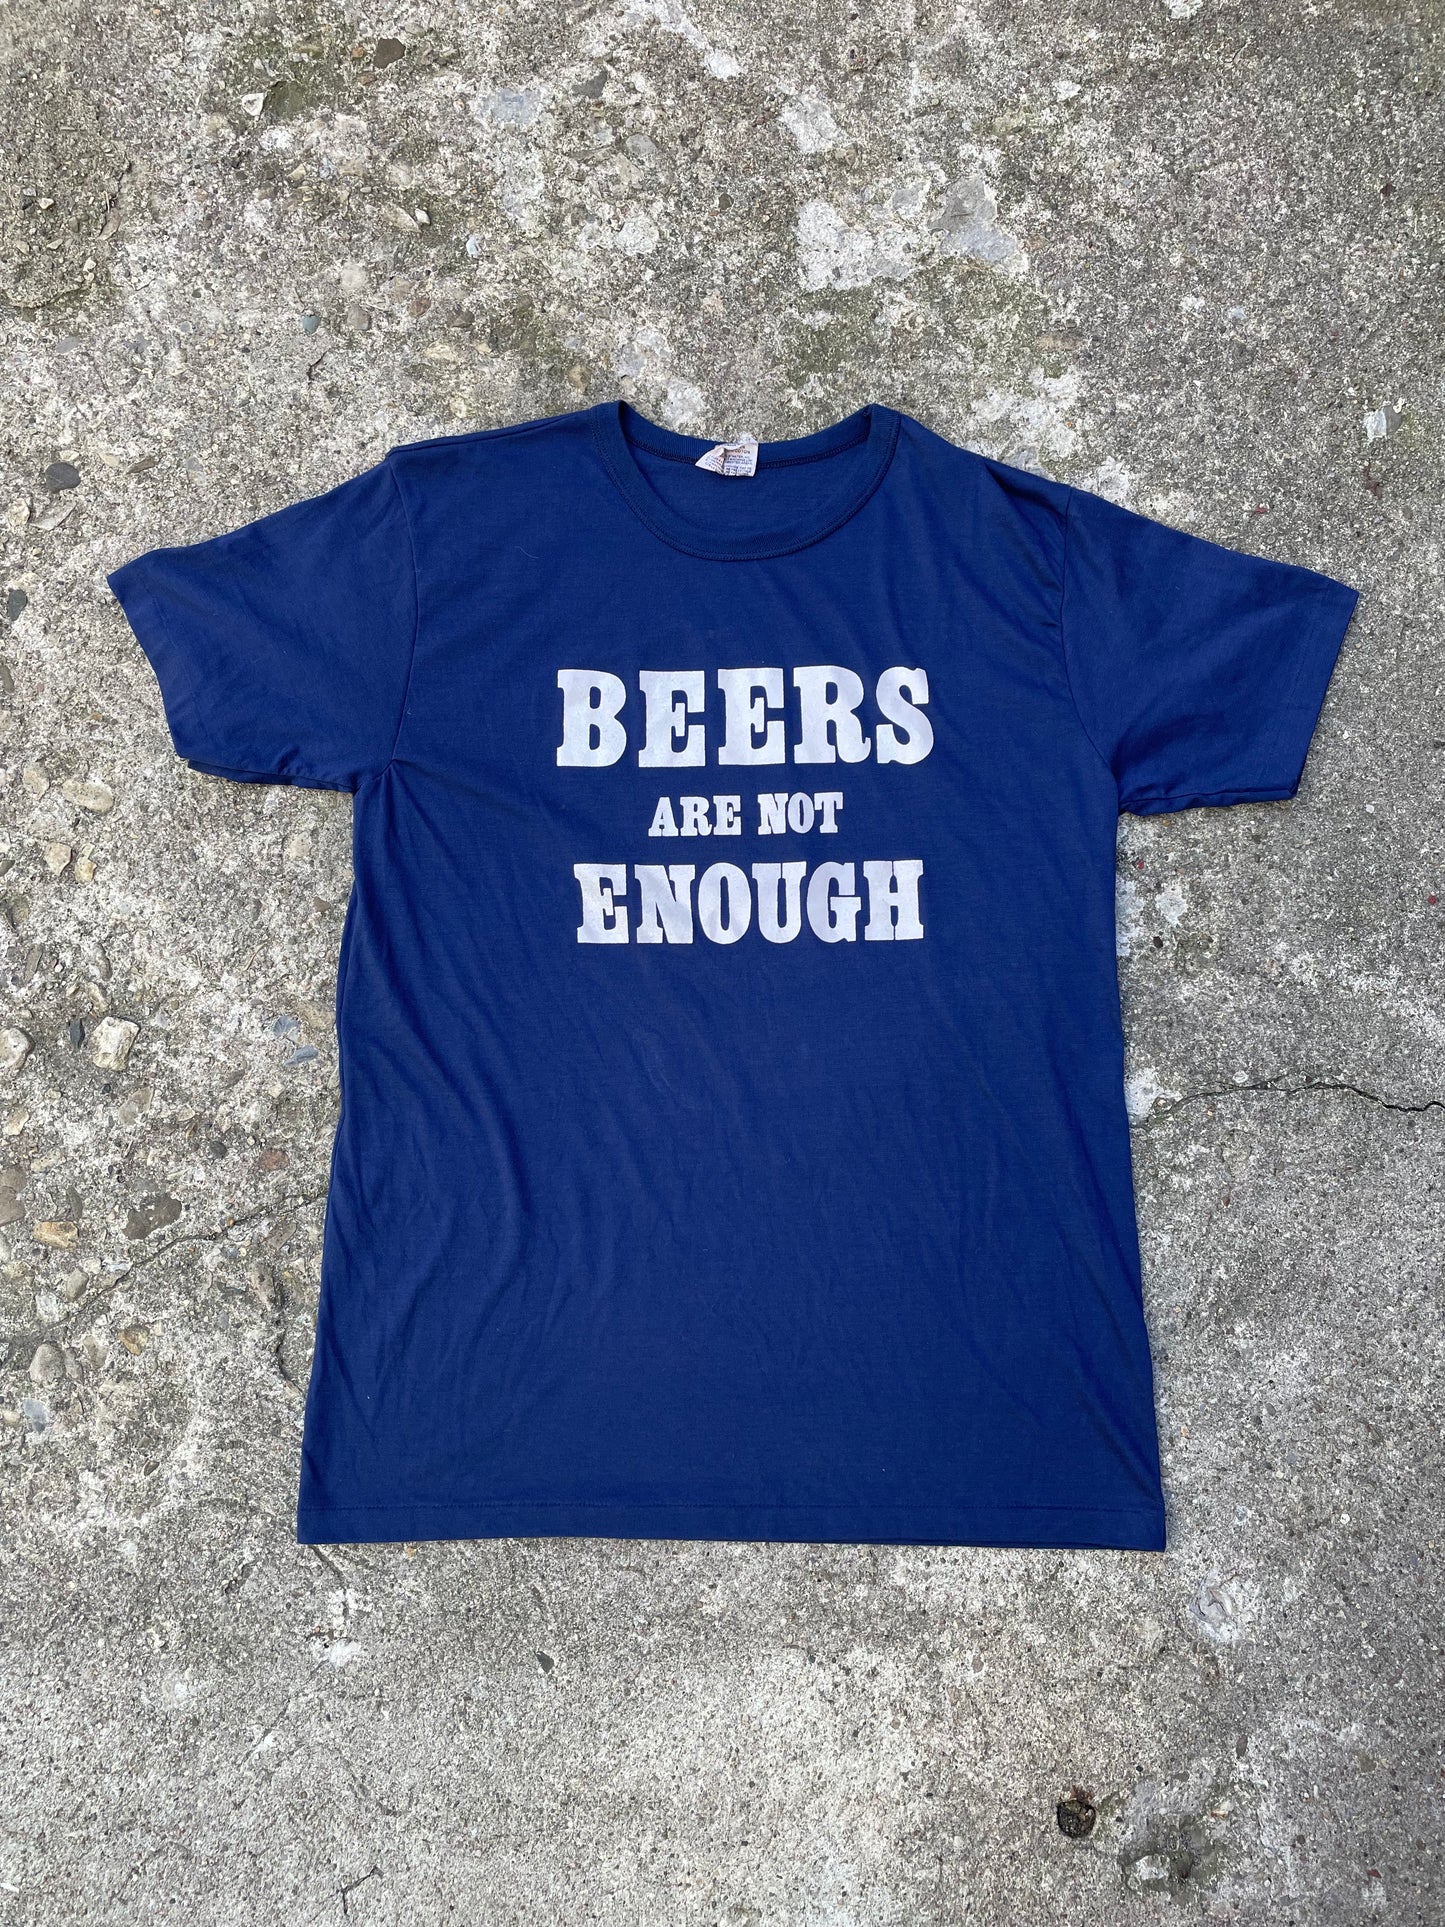 1980's 'Beers Are not Enough' Graphic T-Shirt - M